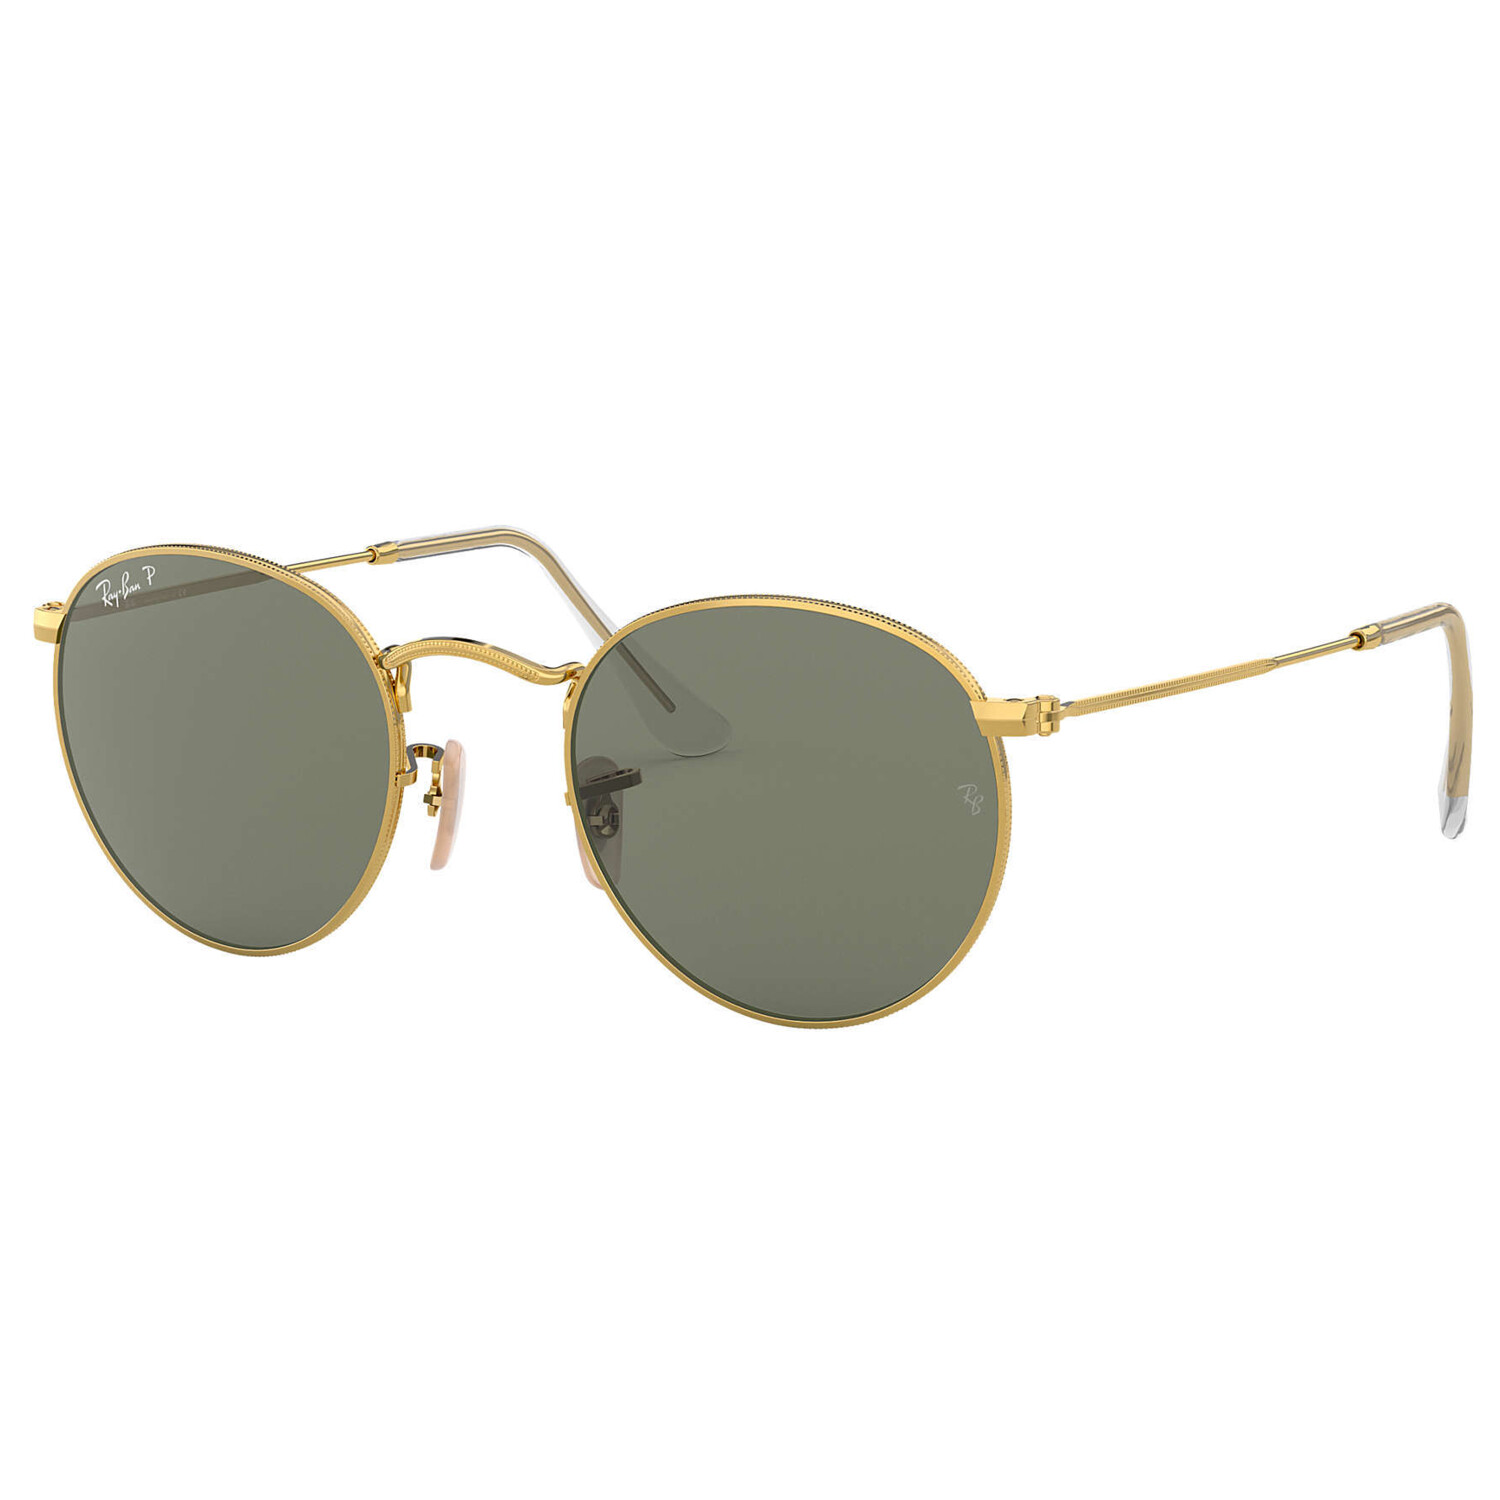 Ray-Ban RB3447 Round Metal Sunglasses - image 1 of 12